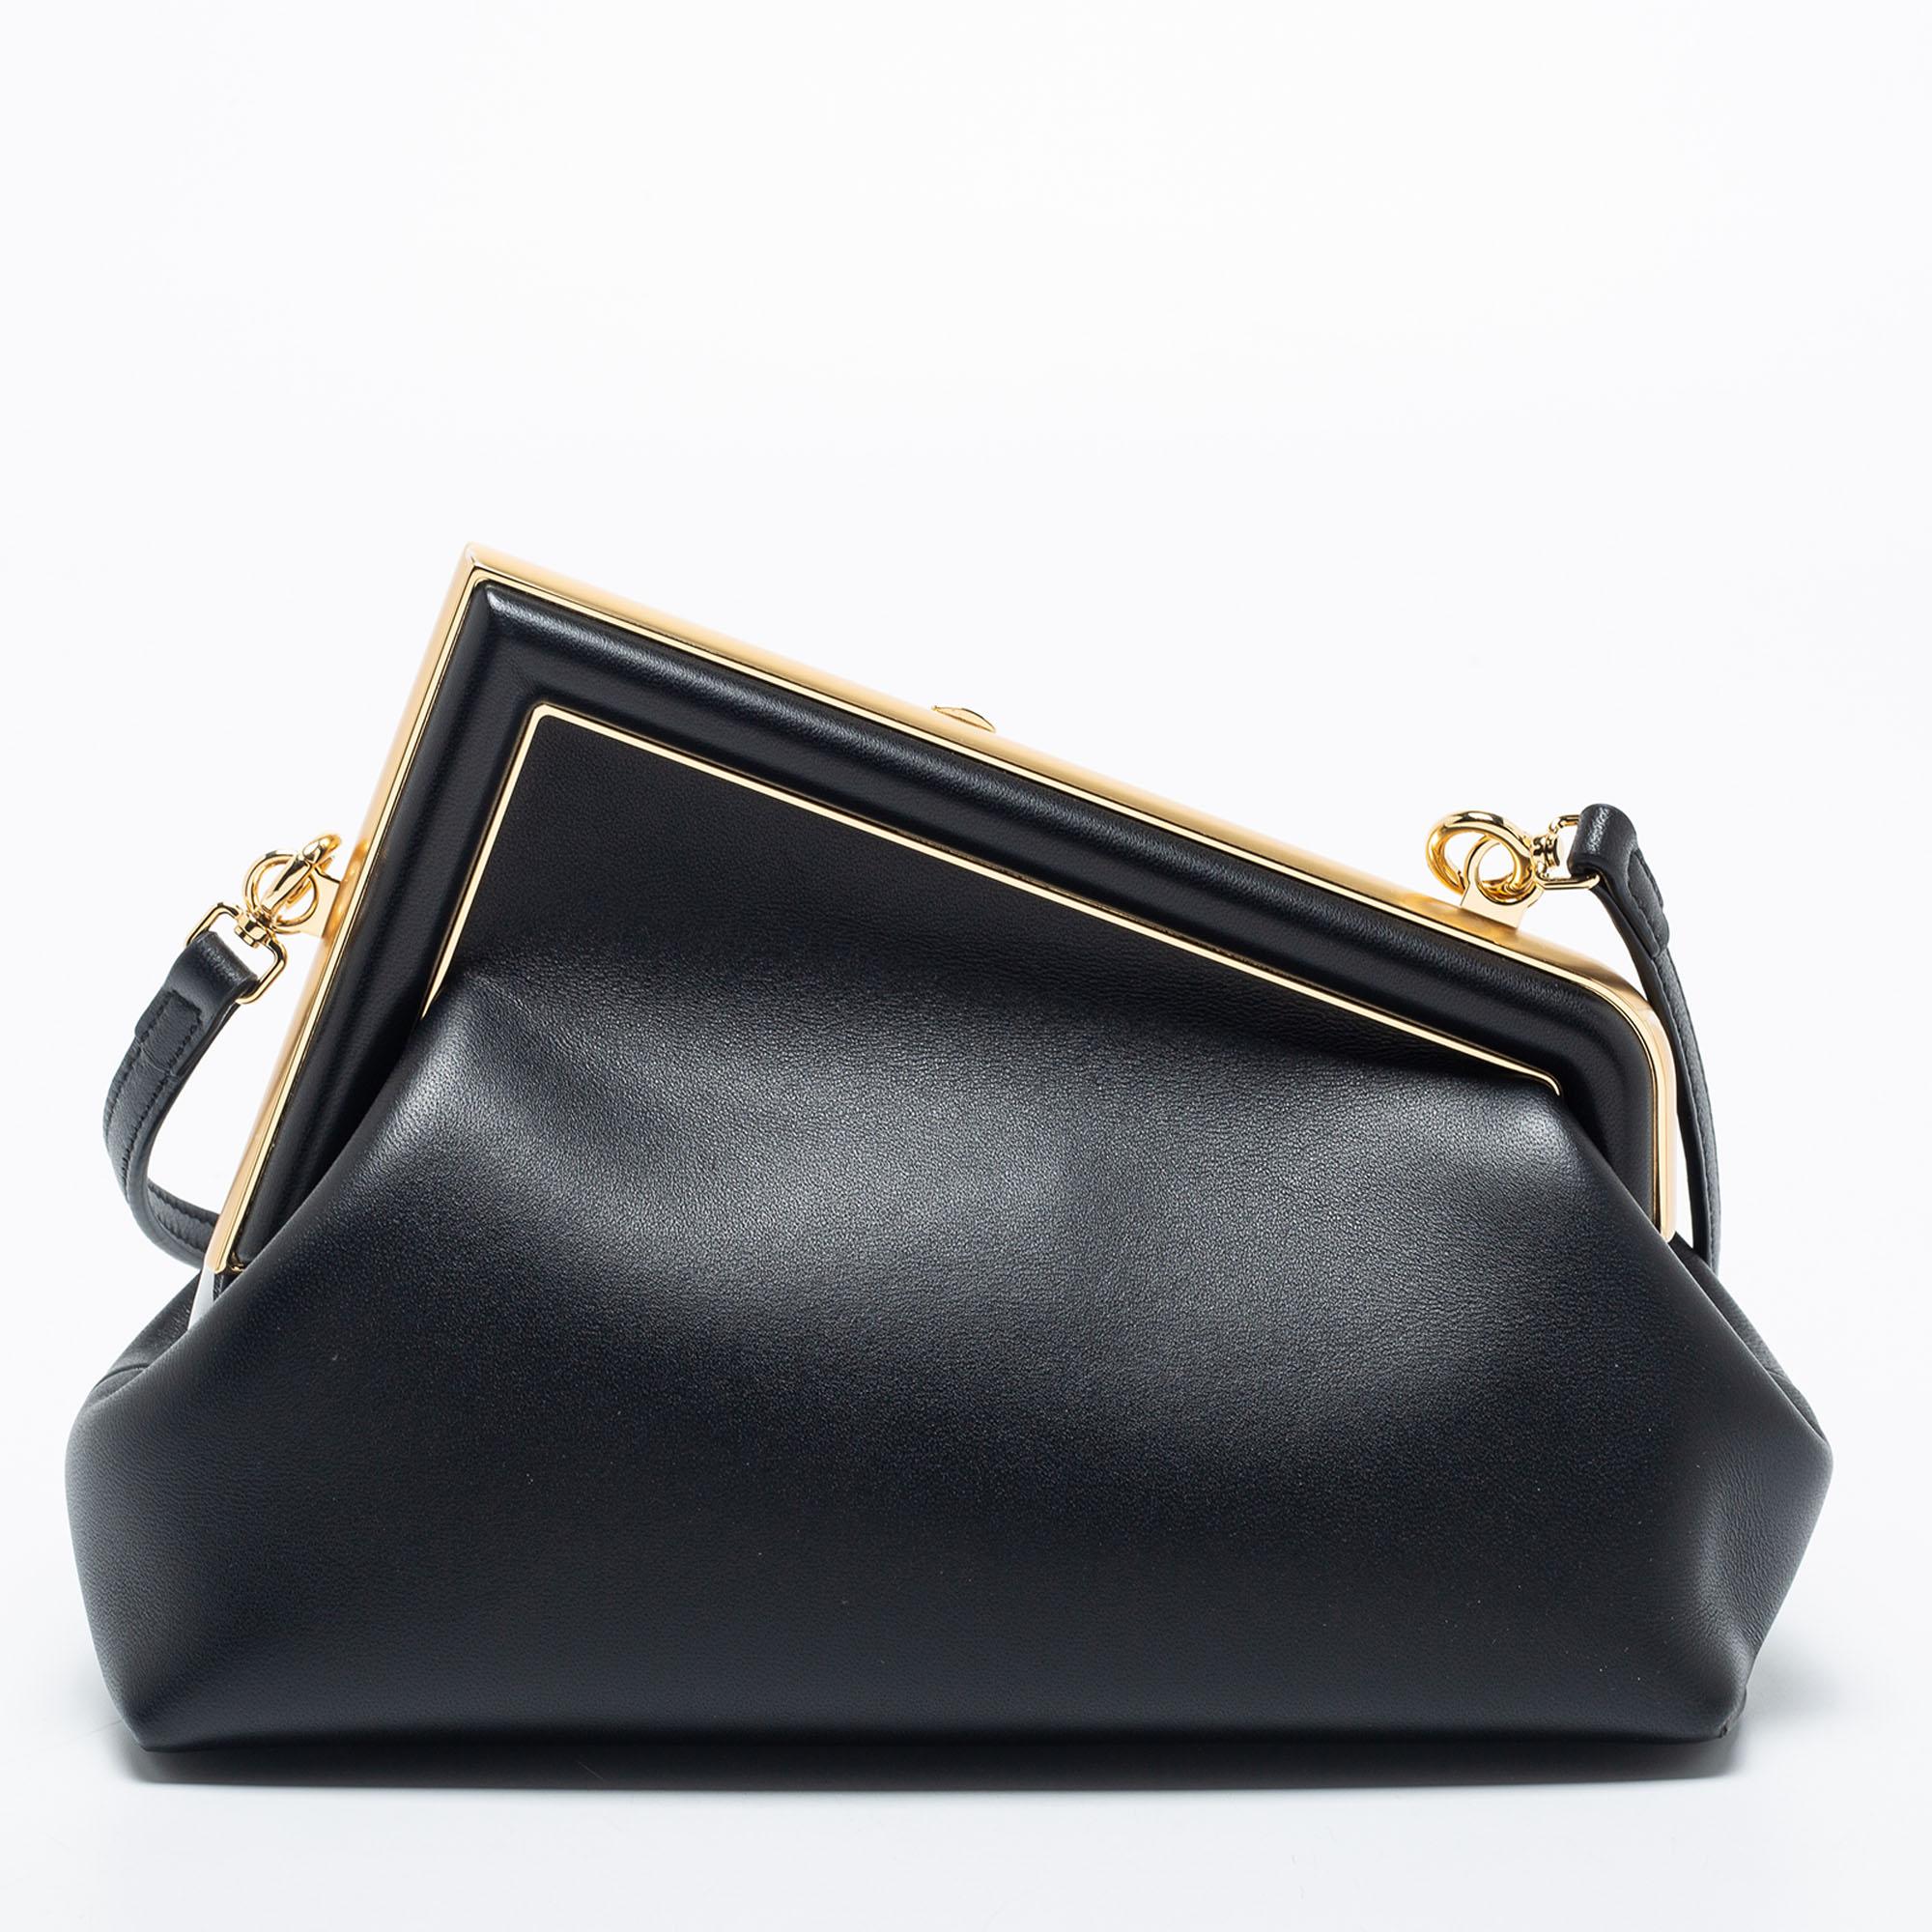 Feel stylish every time you walk out with this skillfully made, iconic Fendi shoulder bag. Crafted from black leather, the Fendi First bag features an uber-chic F-shaped frame top. Lined with smooth canvas on the inside, it is made to keep your